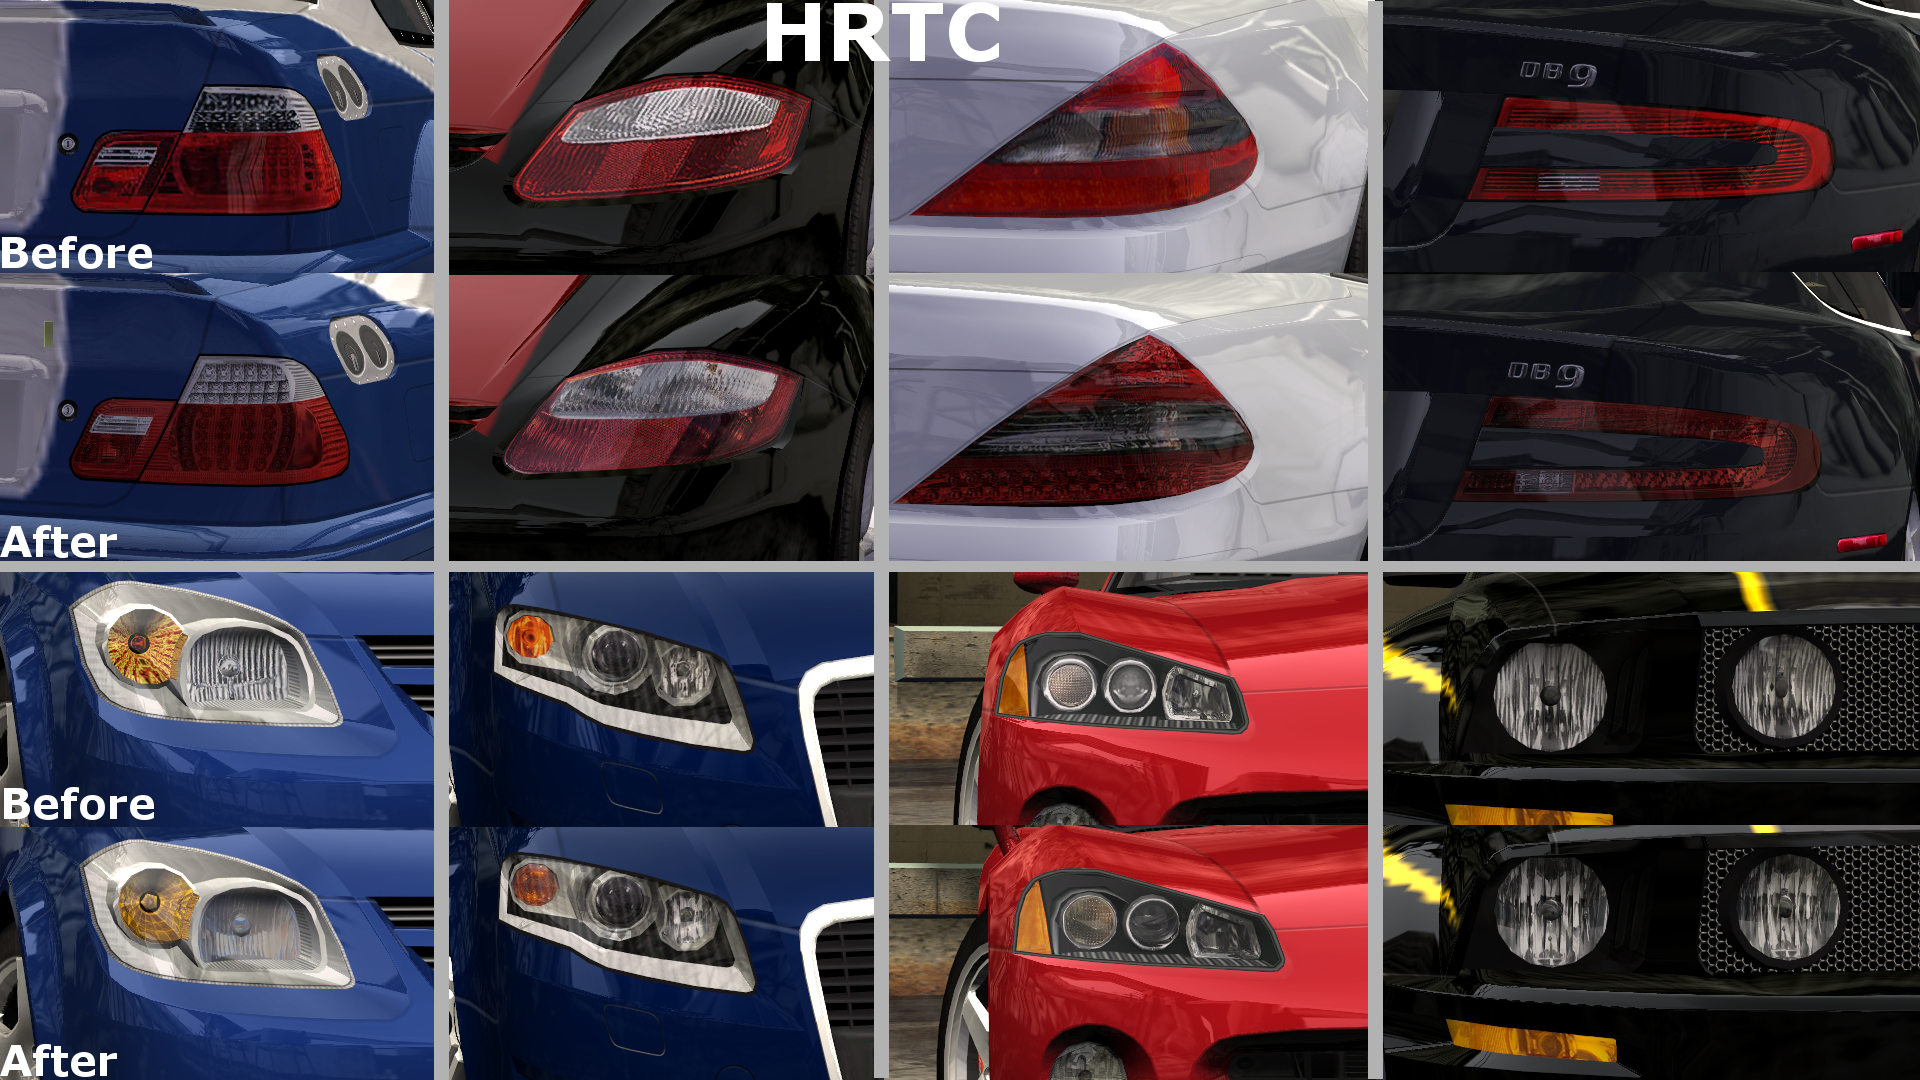 [HRTC] High Resolution Textures for Cars (Updated May 28)